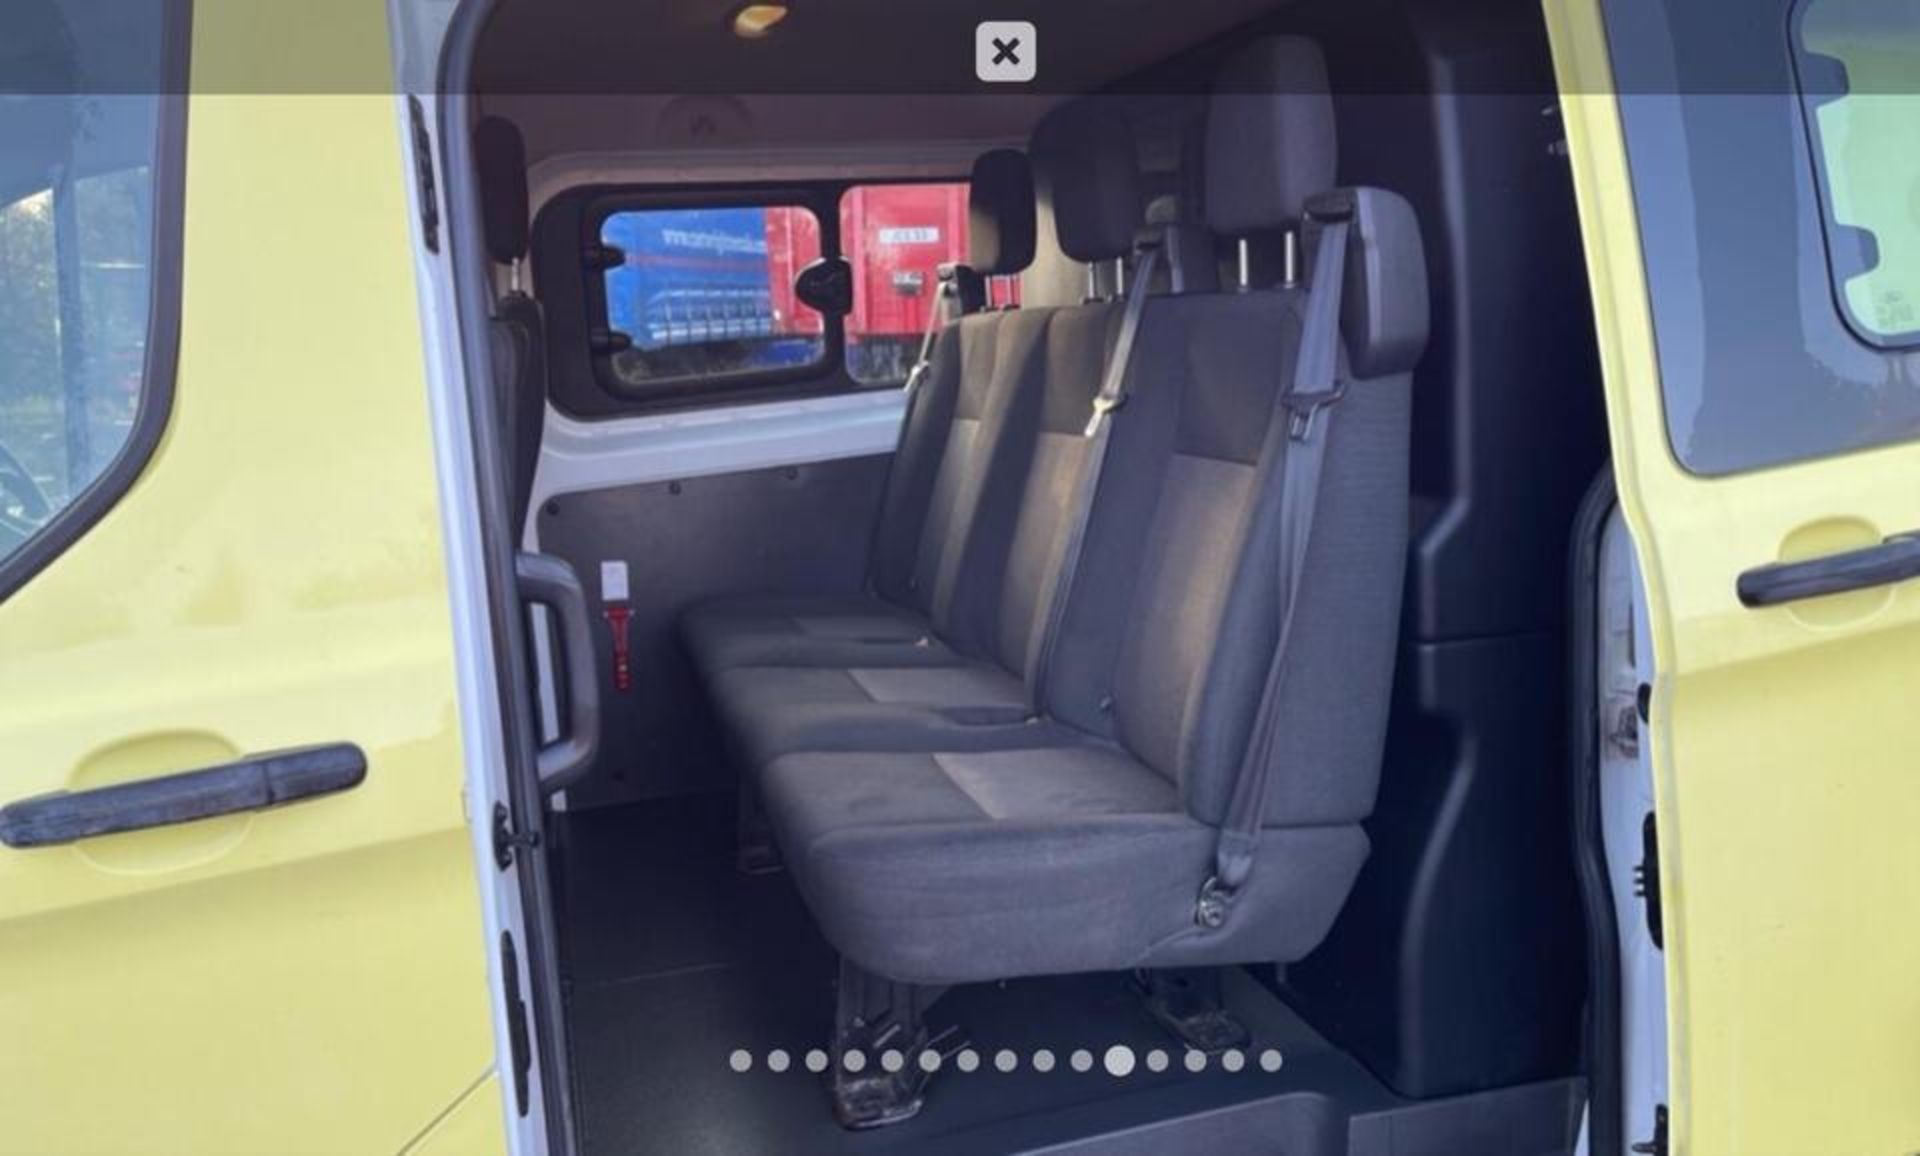 2015 FORD TRANSIT - 129K MILES - HPI CLEAR- READY FOR ACTION! - Image 10 of 12